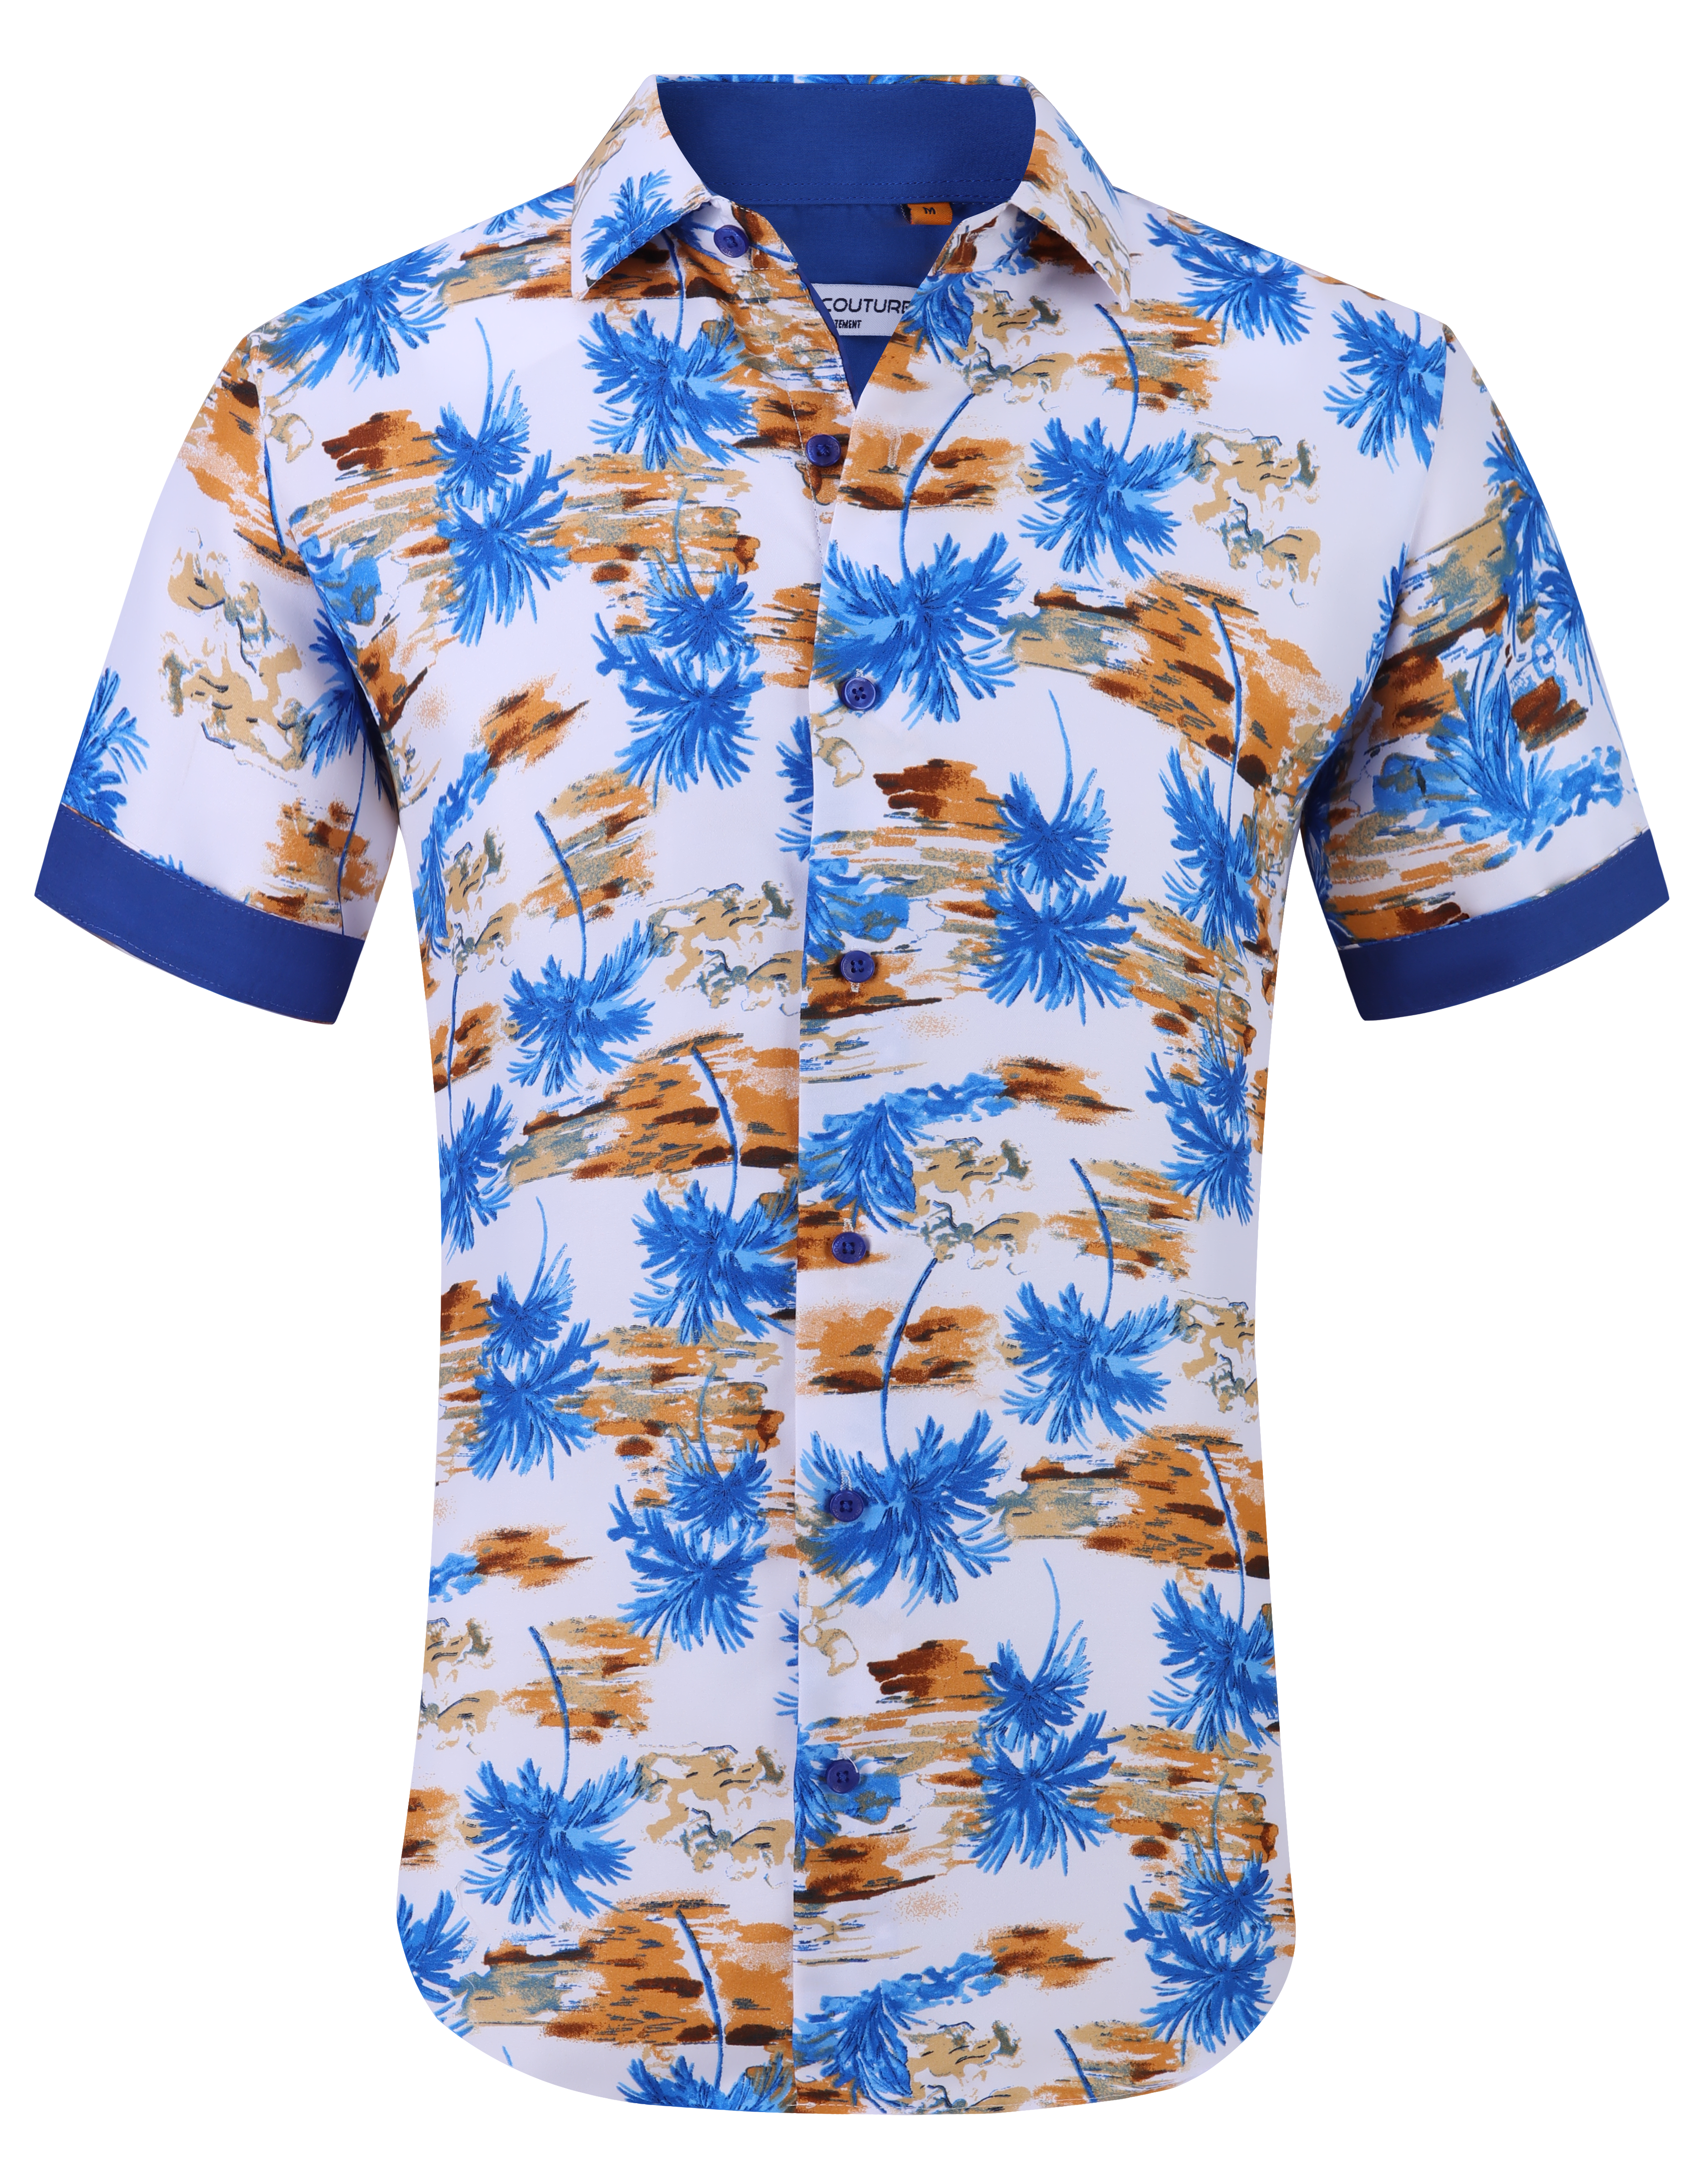 Suslo Floral Printed Short Sleeve Shirt (SC520-4-White)